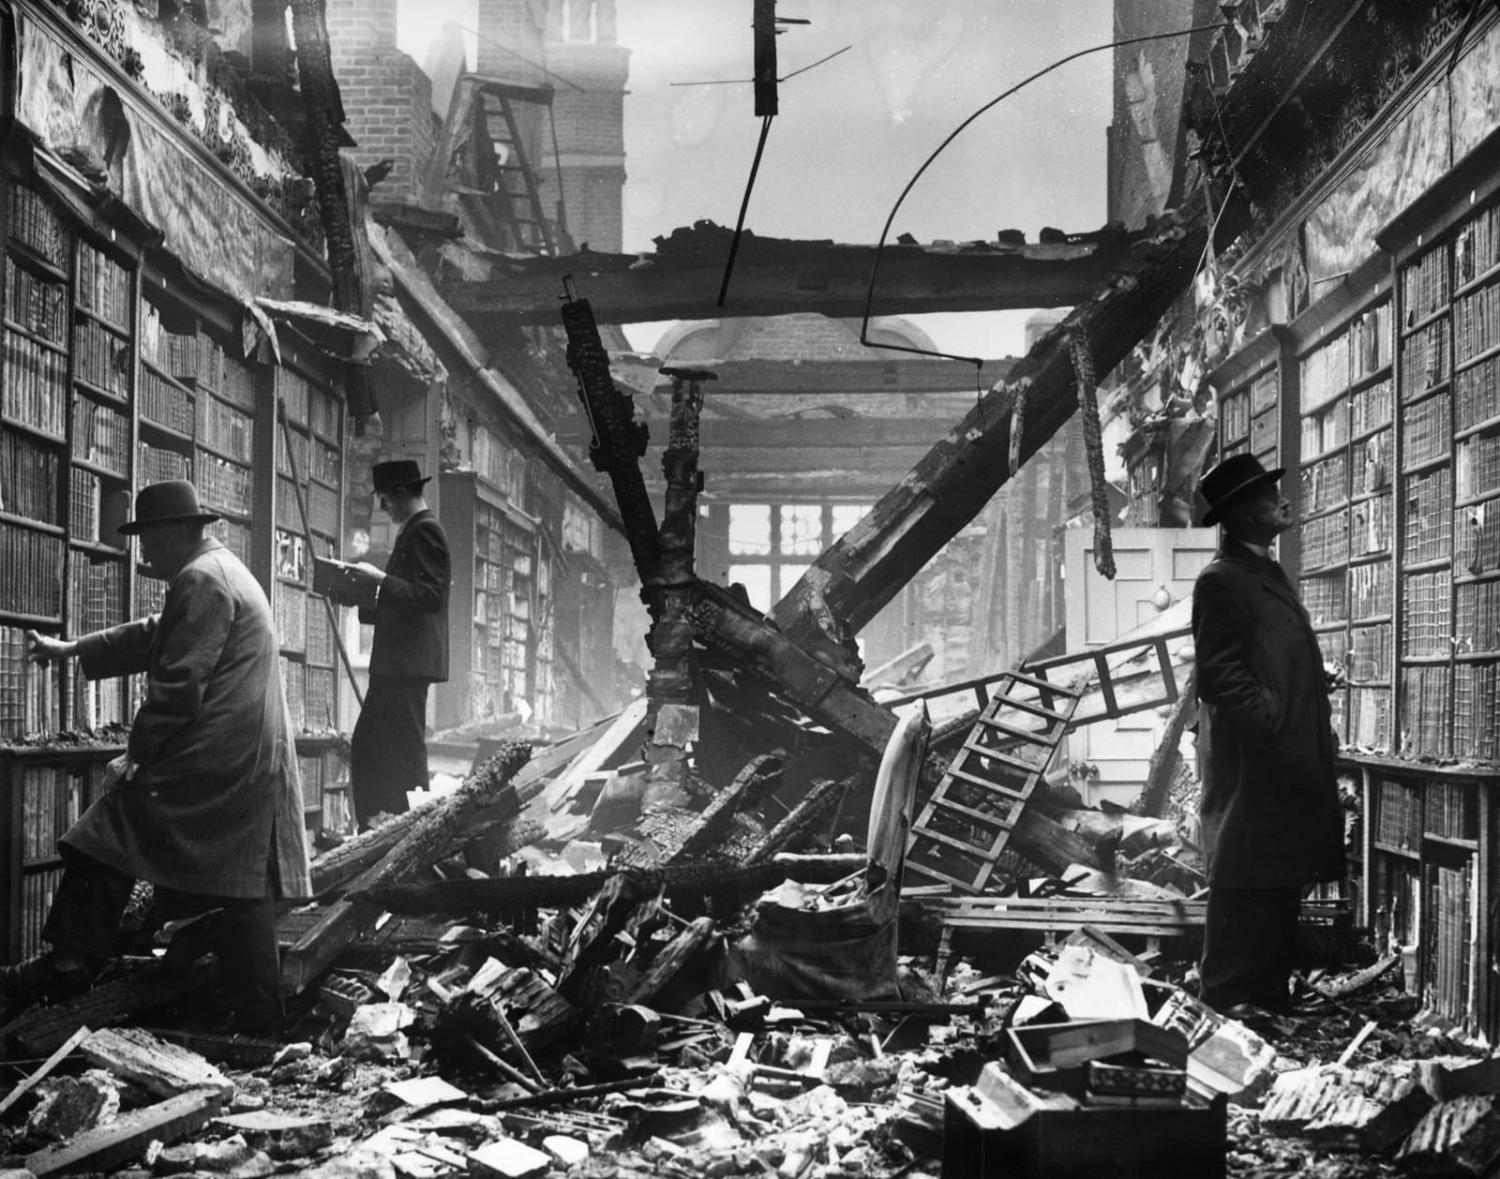 Readers choose books from the charred remains of the Holland House library, London, 23 October 1940 (Harrison/Fox Photos/Hulton Archive/Getty Images)